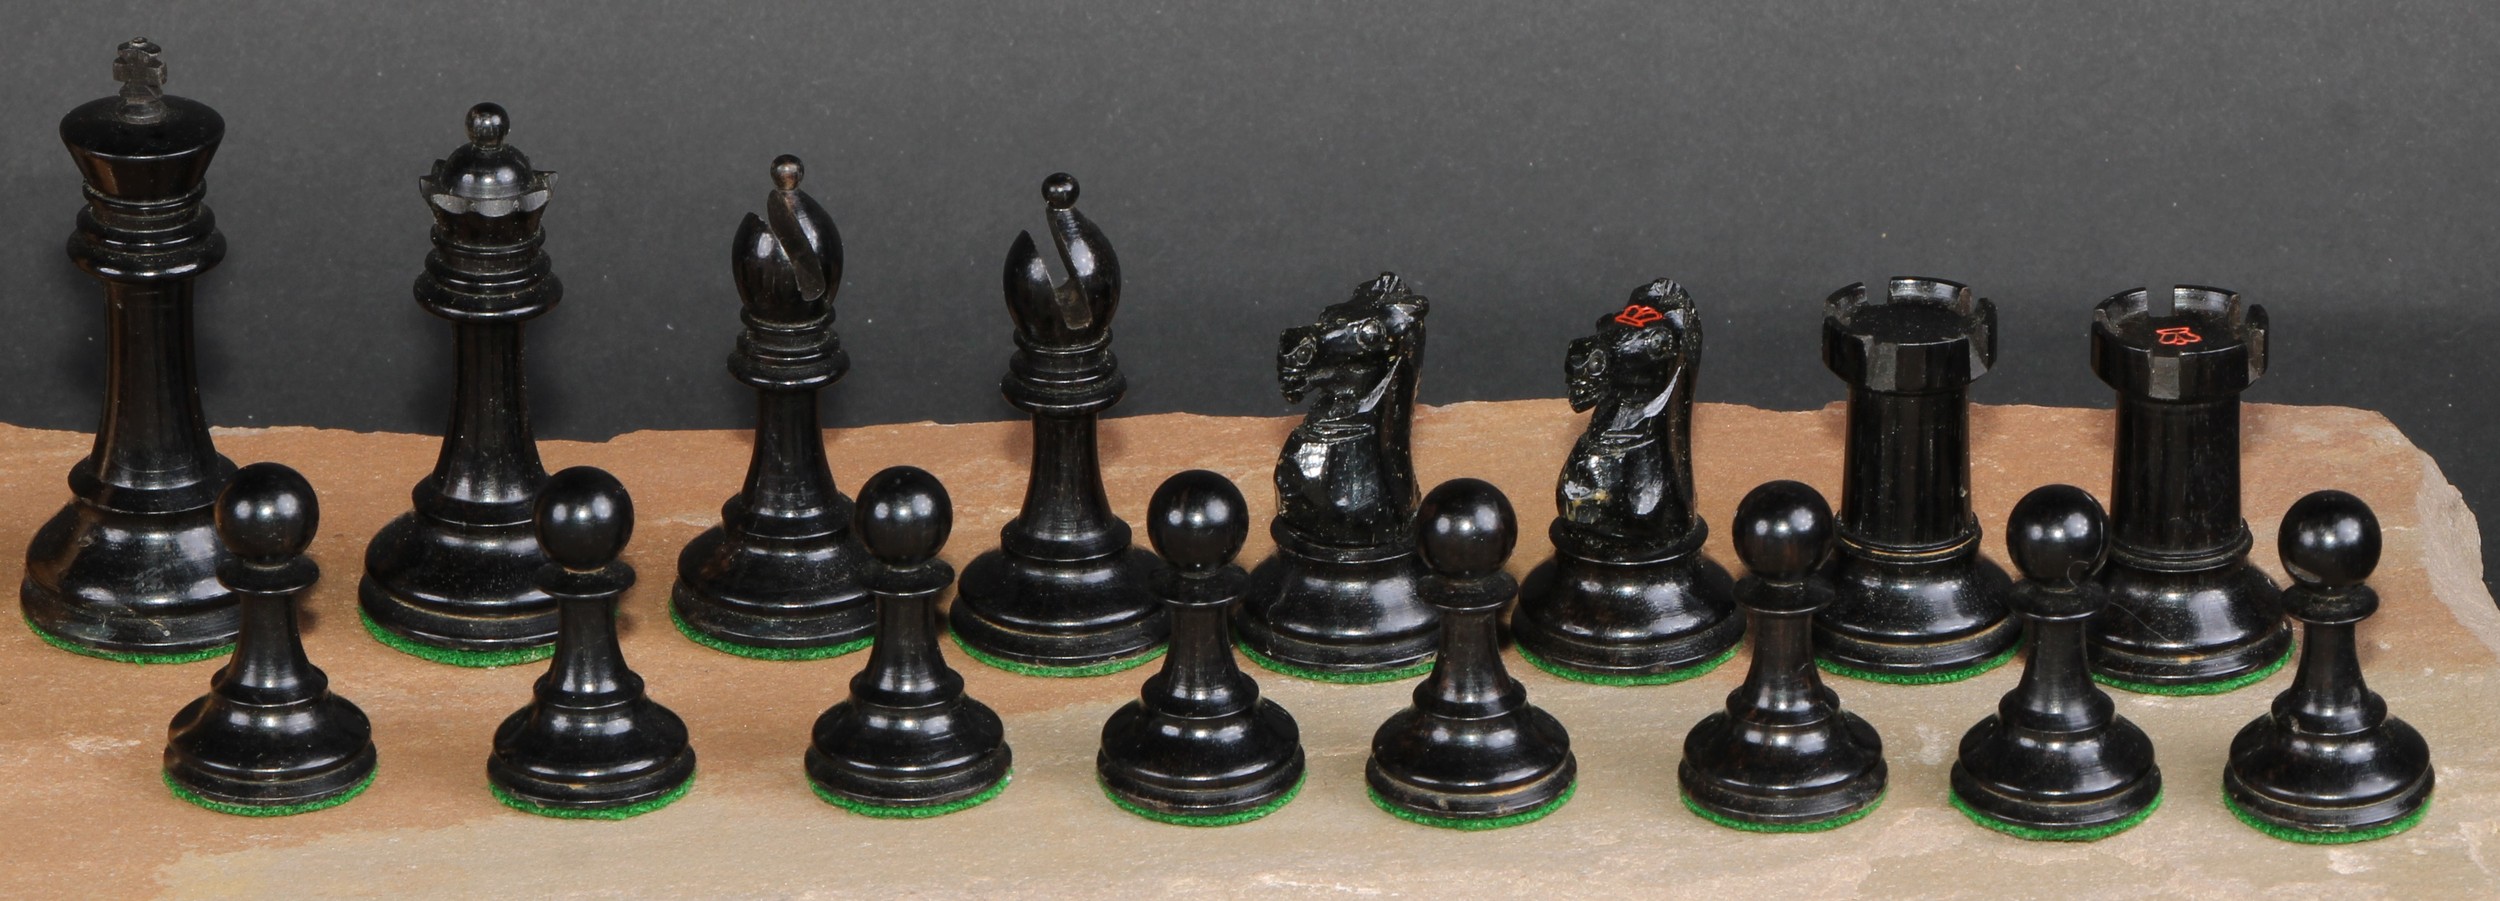 A boxwood and ebonised Staunton chess set, marked for King’s side, the Kings 7cm high, mahogany box - Image 4 of 4